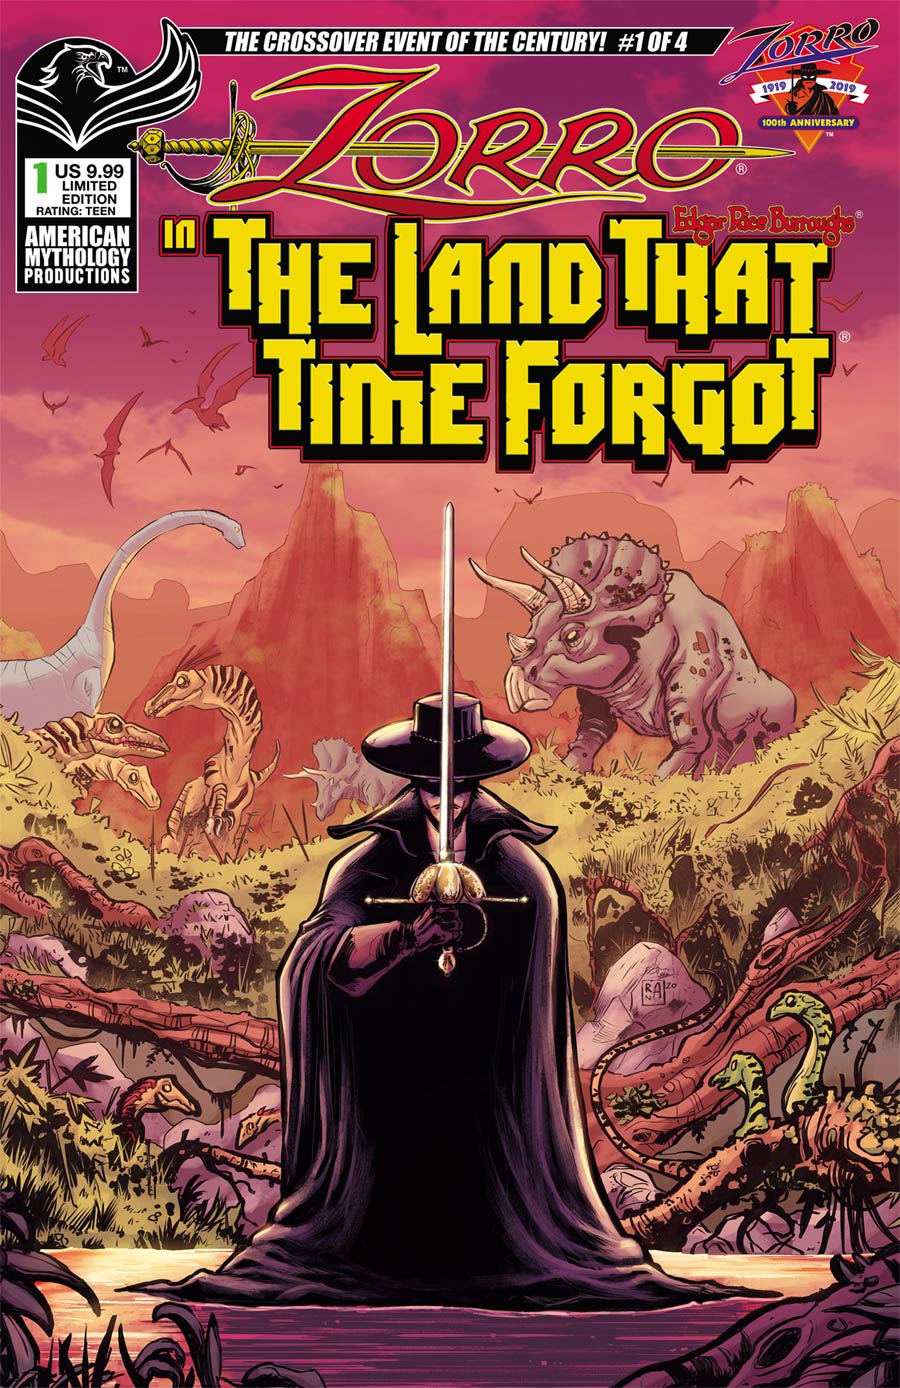 Zorro In The Land That Time Forgot #1 Cover C Limited Edition Alessandro Ranaldi Variant Cover